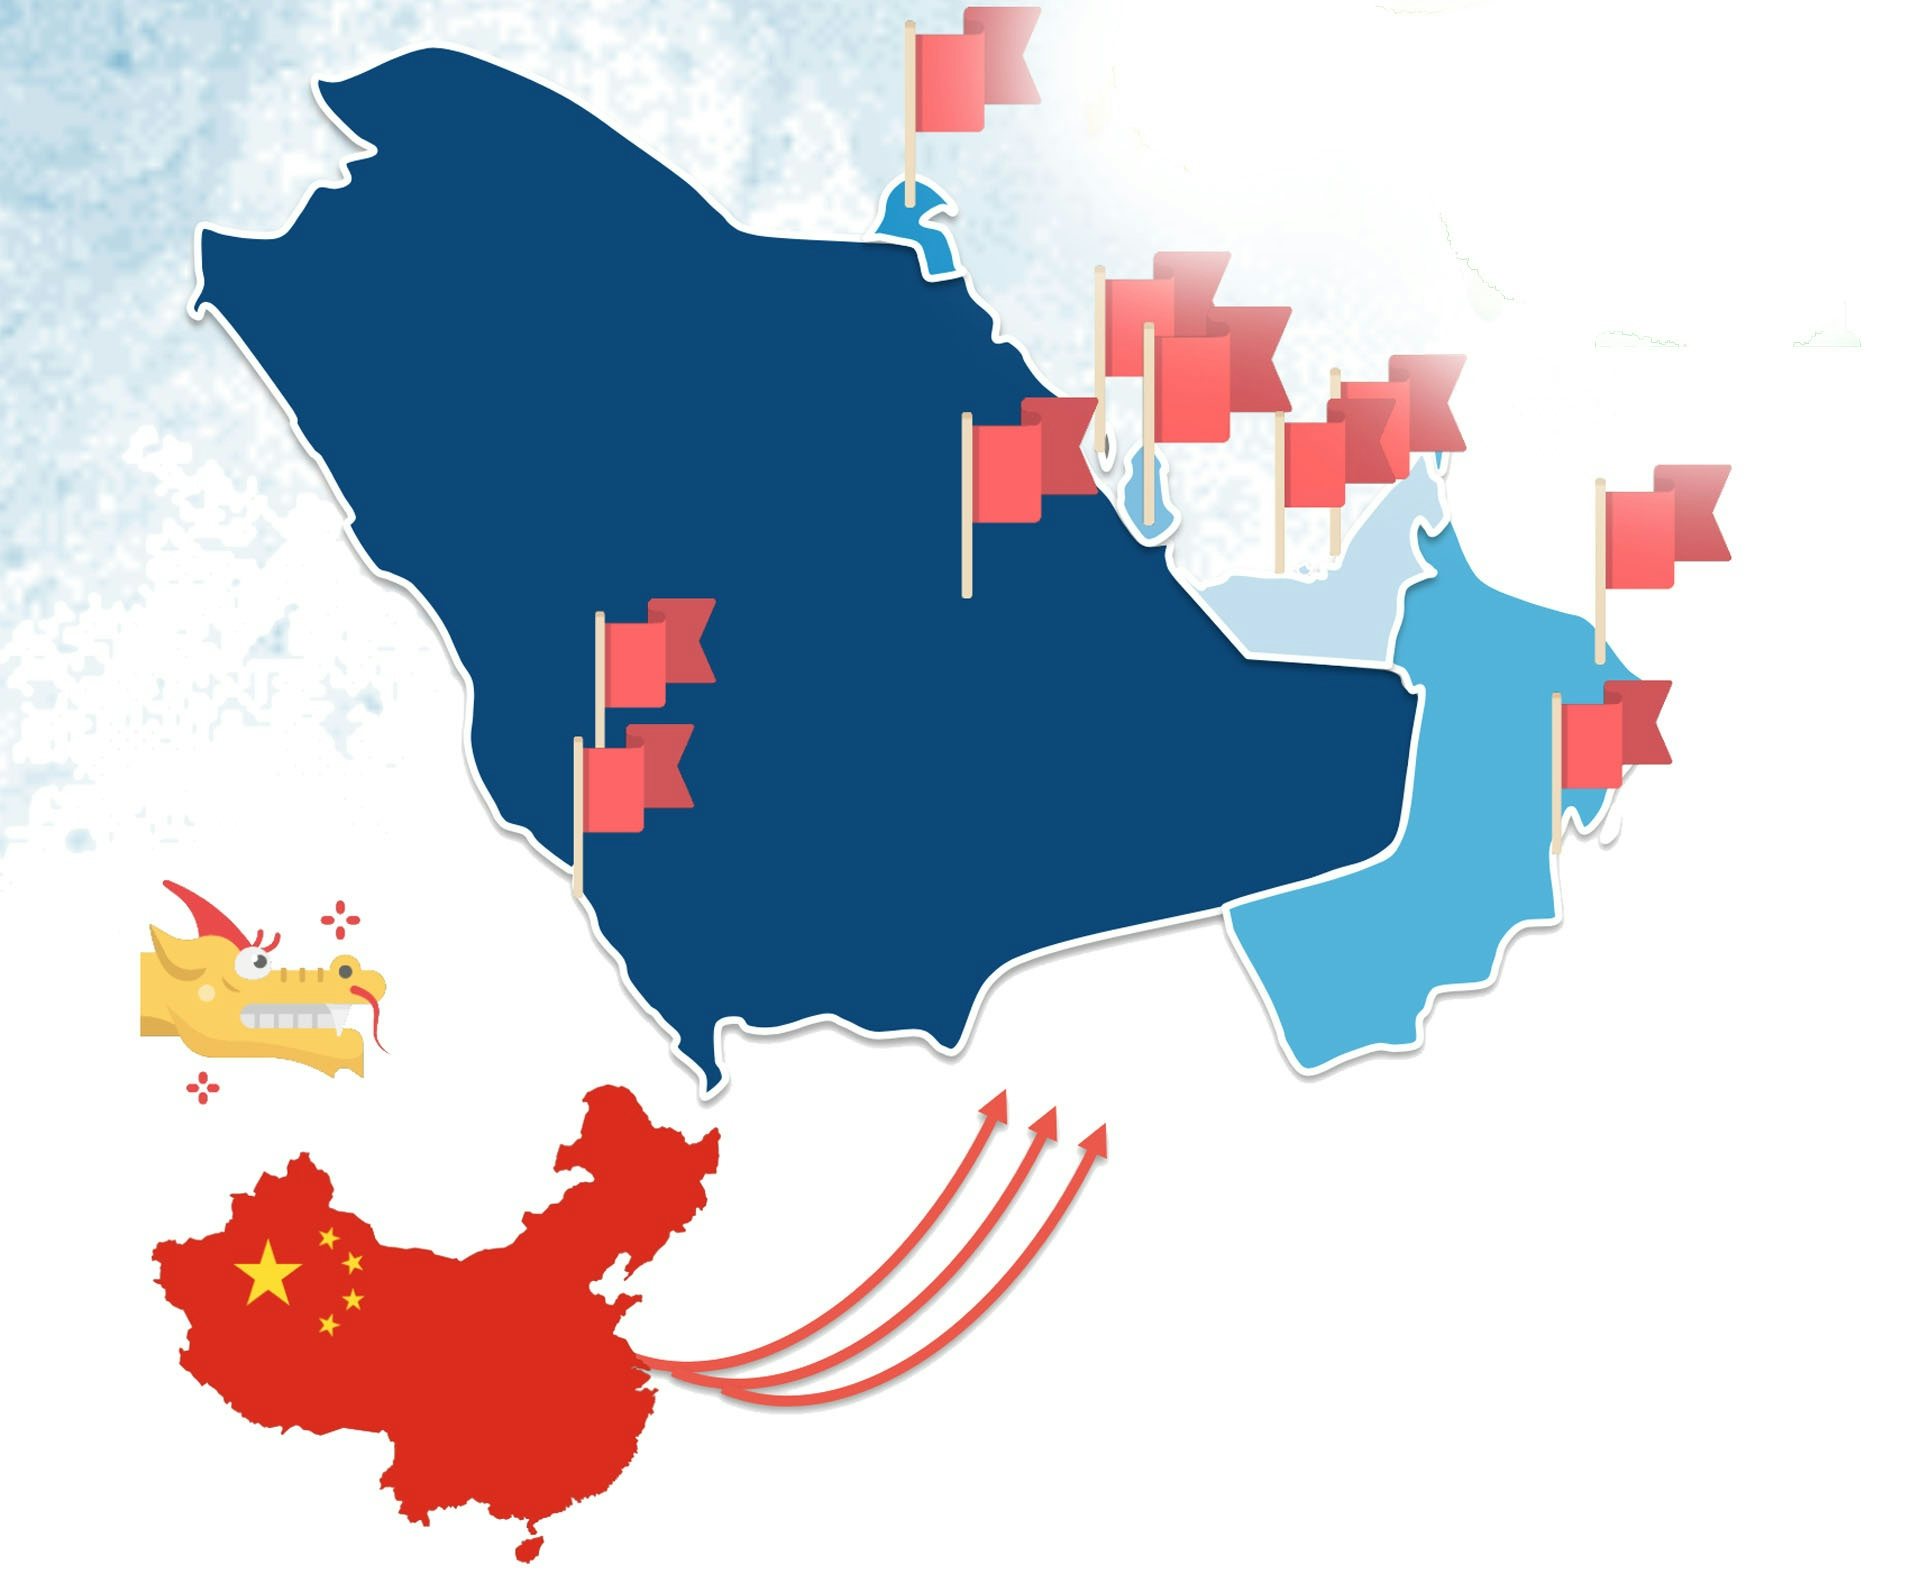 Colliers International identifies China and India as potential "mega source markets" for destinations in the Gulf region. (Courtesy Photo)